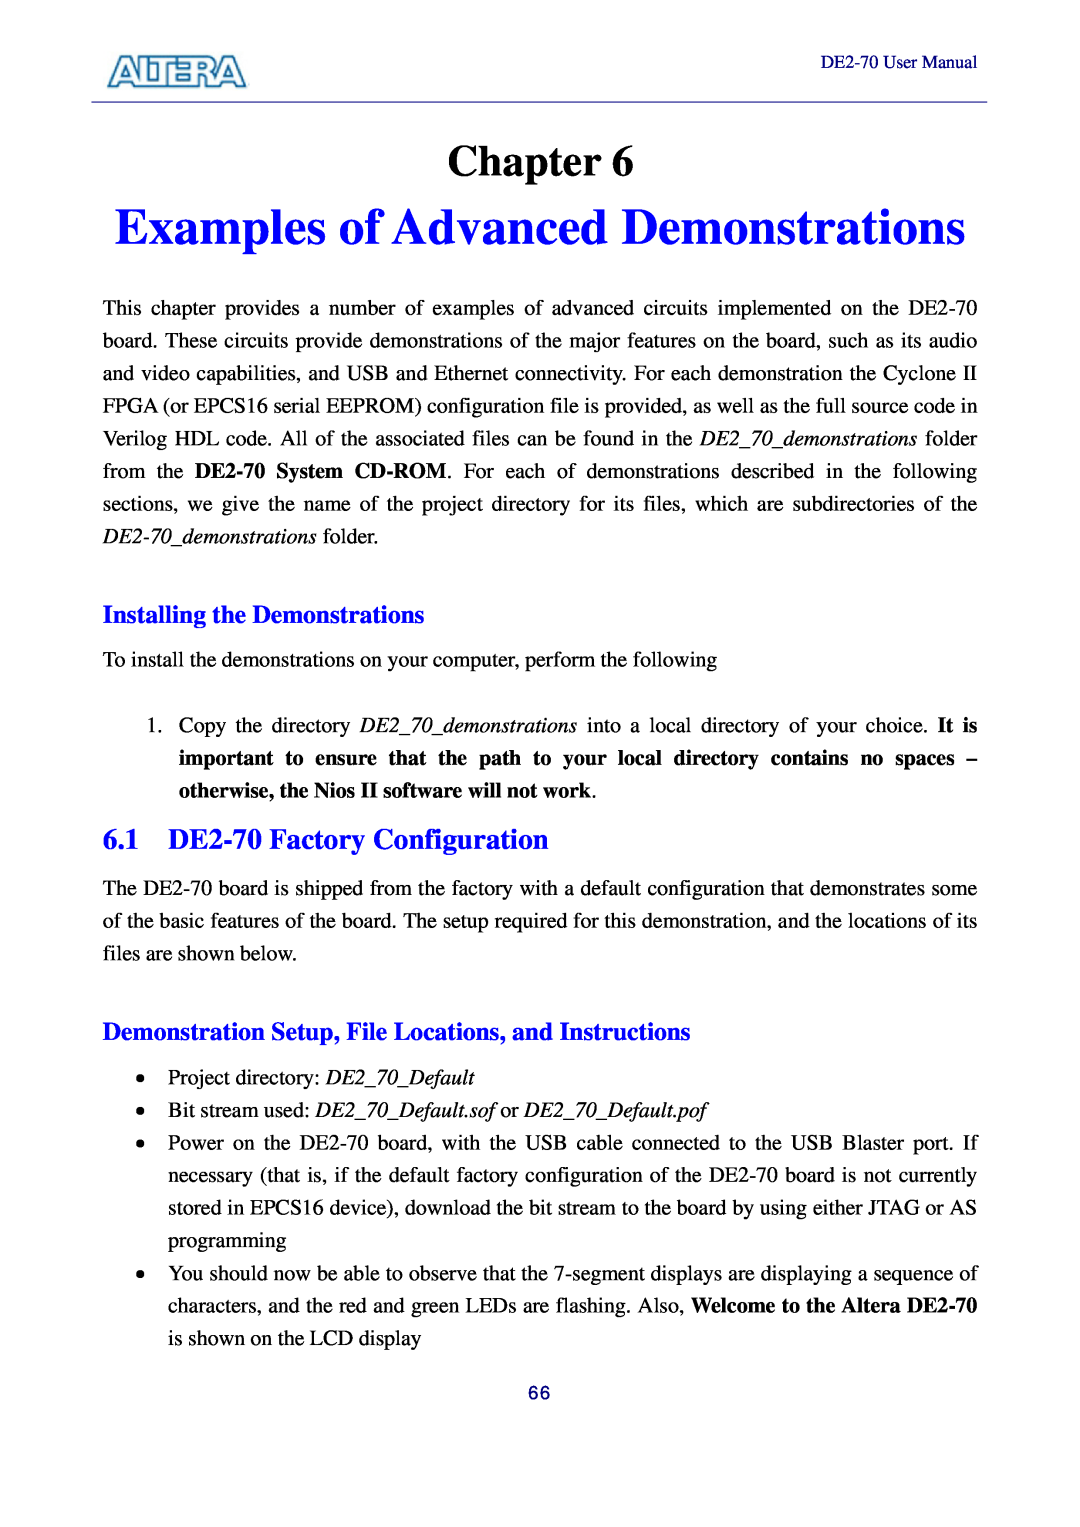 Sigma Examples of Advanced Demonstrations, 6.1 DE2-70 Factory Configuration, Installing the Demonstrations, Chapter 